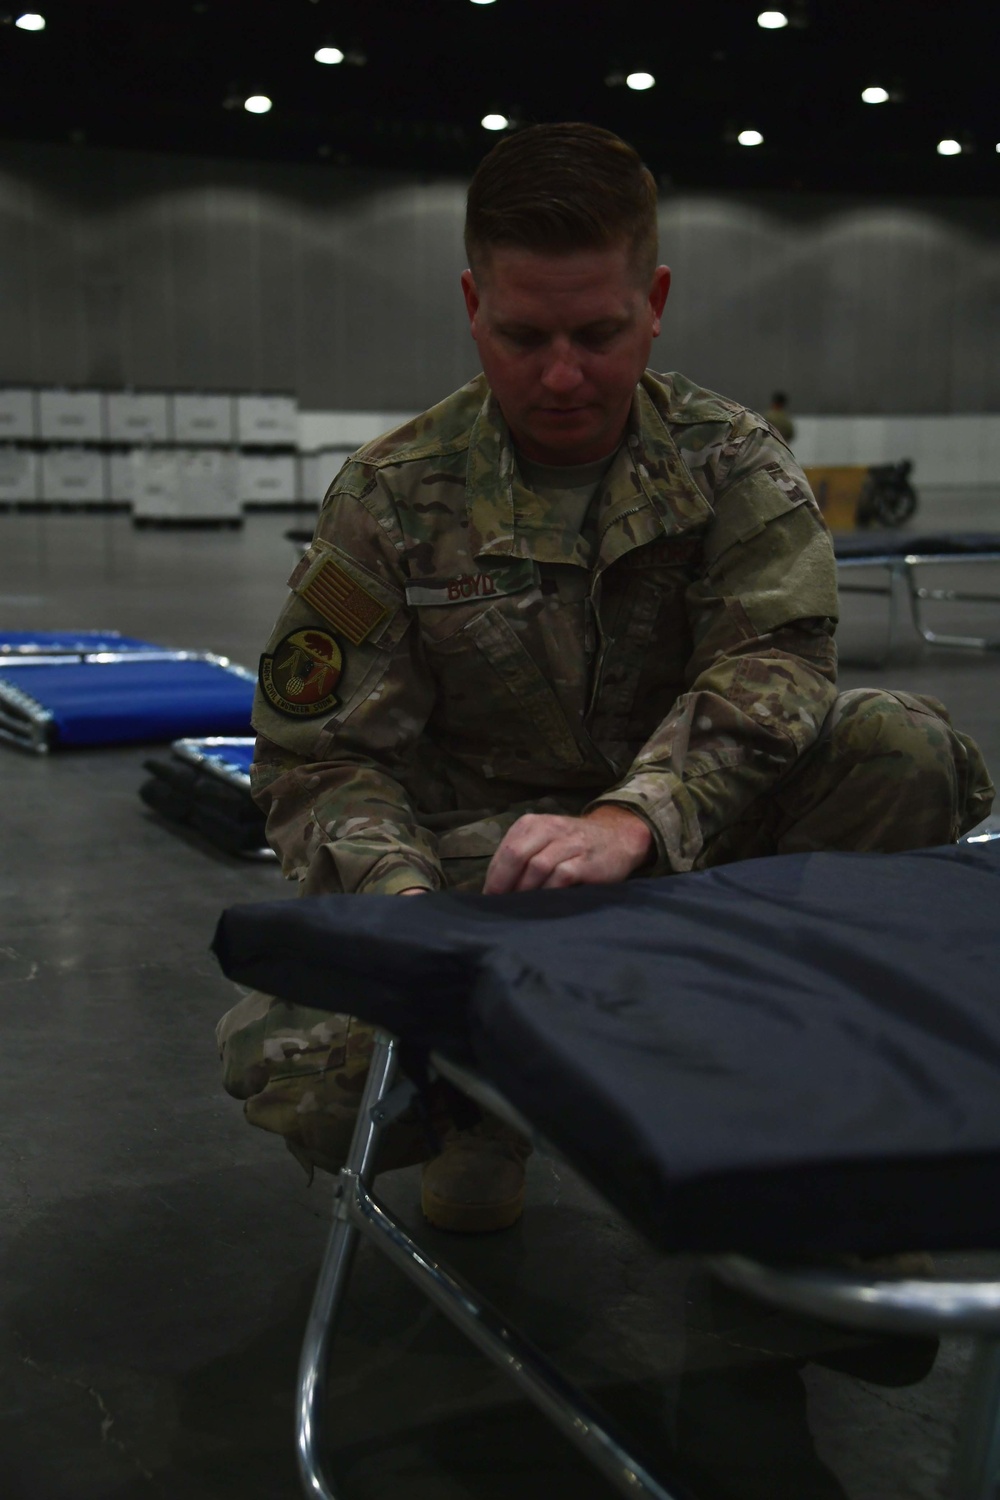 146th Airlift Wing assists in assembling federal medical stations at Los Angeles Convention Center